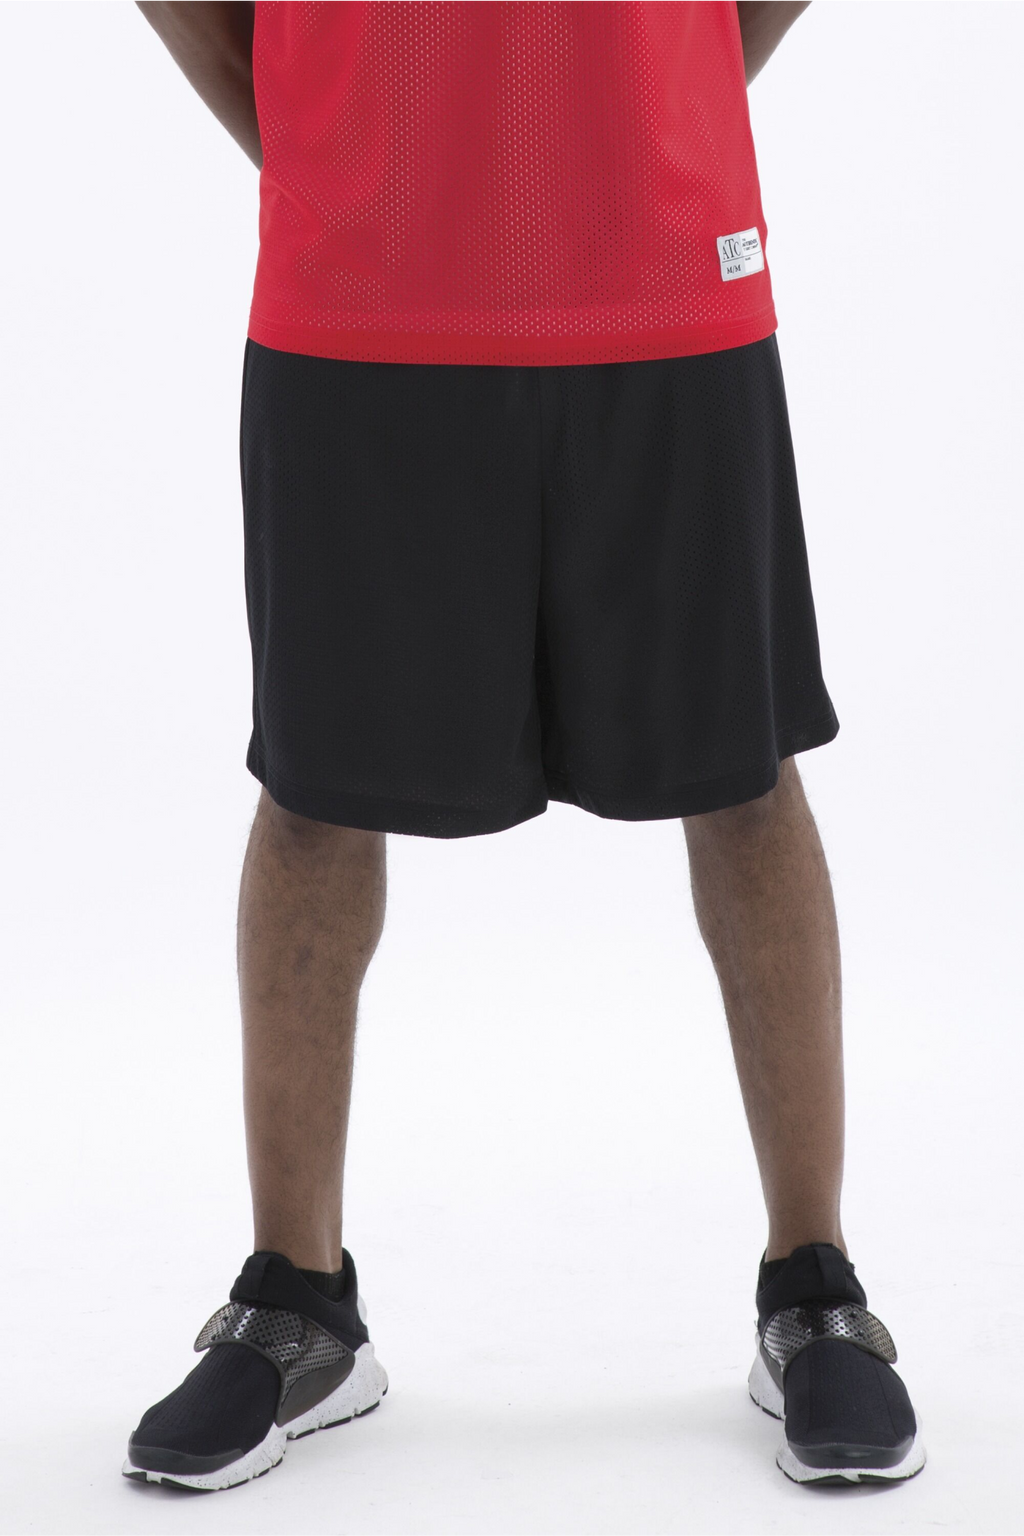 P04475 - Wave - Athletic Short with Pockets - Toronto Apparel